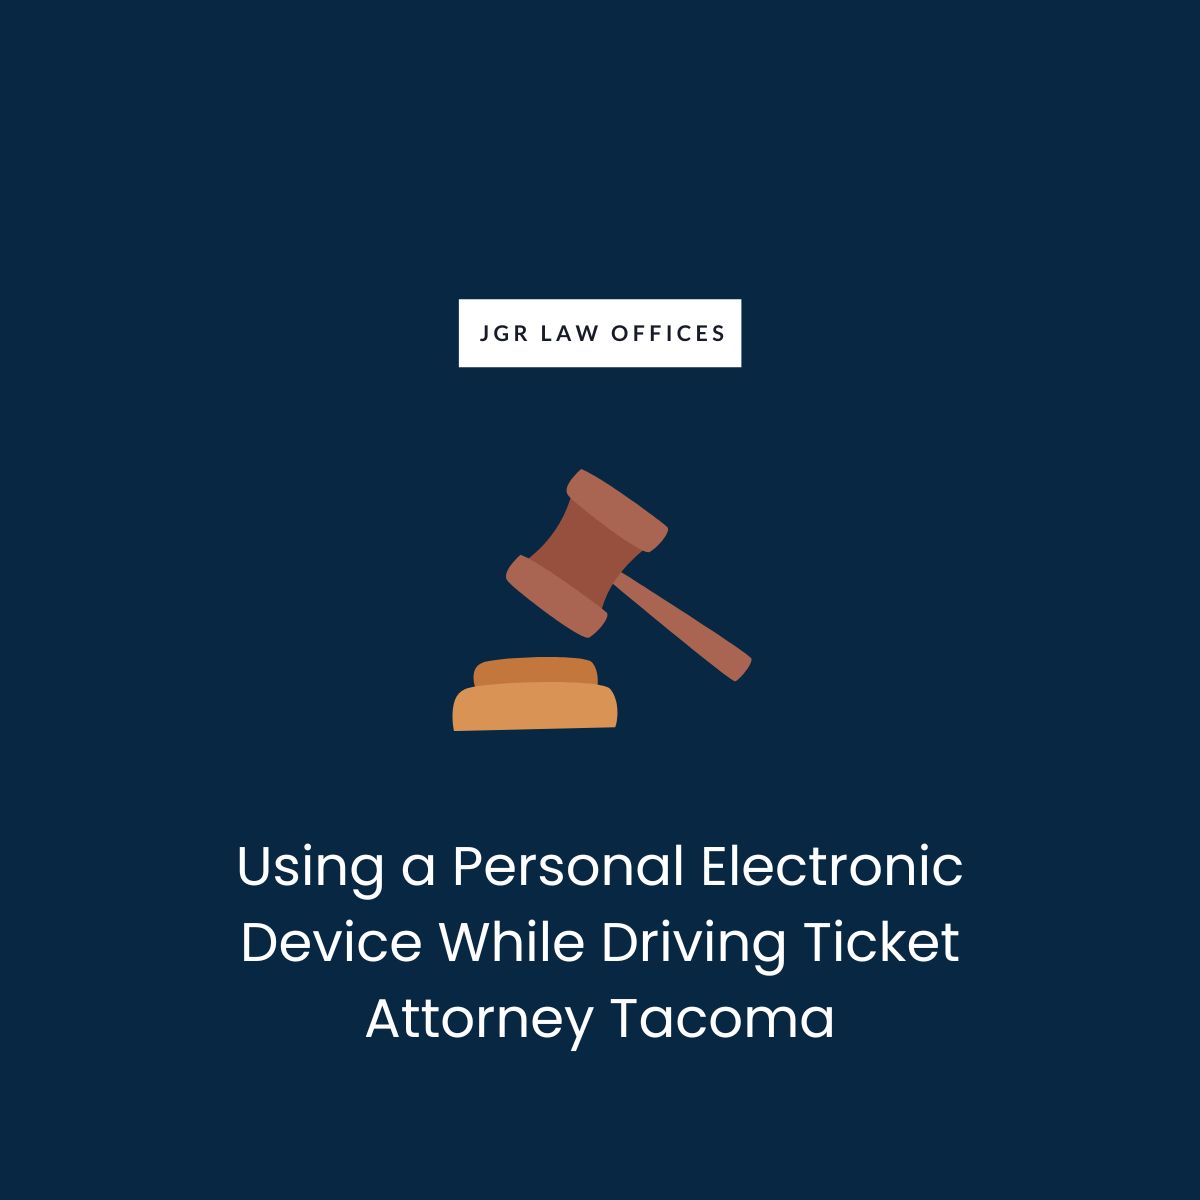 Using a Personal Electronic Device While Driving Ticket Attorney Tacoma